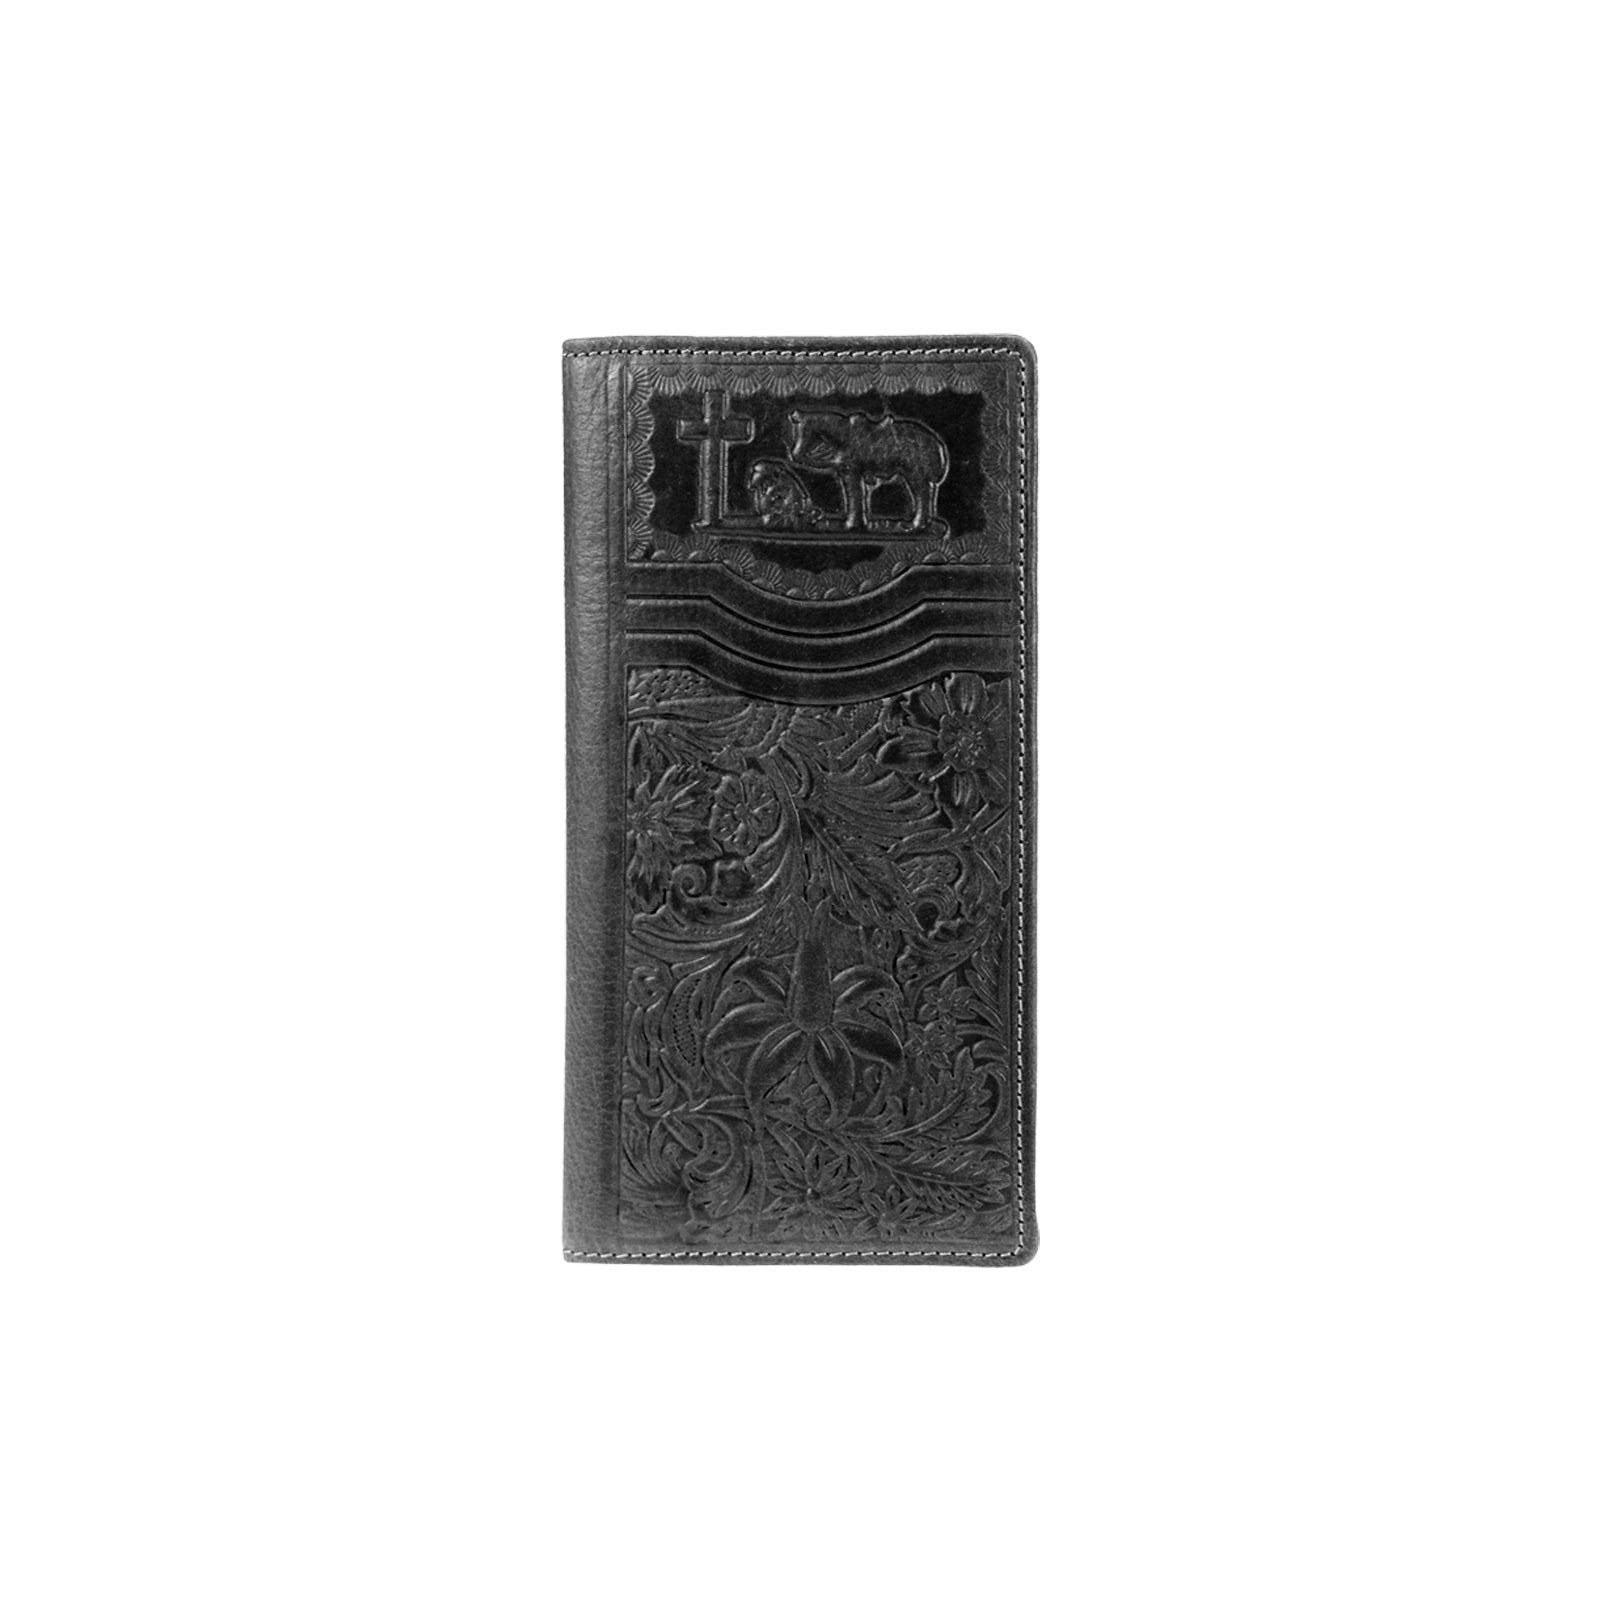 Genuine Leather Spiritual Collection Men's Wallet - Cowgirl Wear